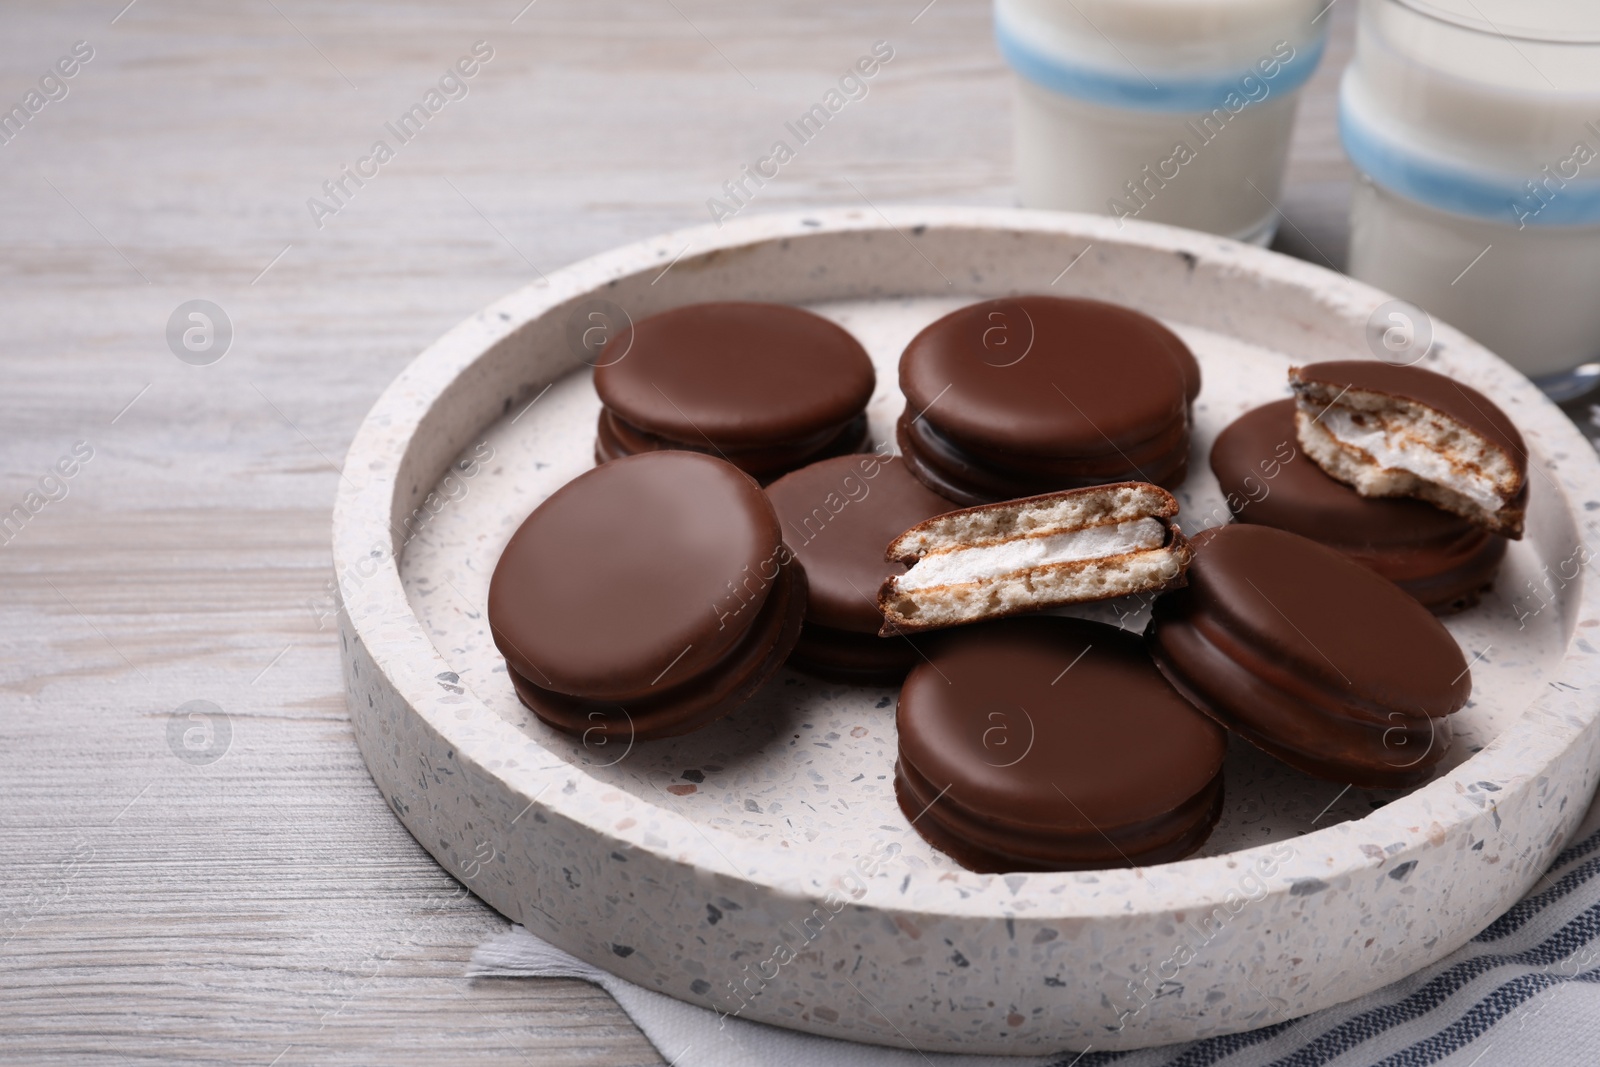 Photo of Tasty choco pies on white wooden table